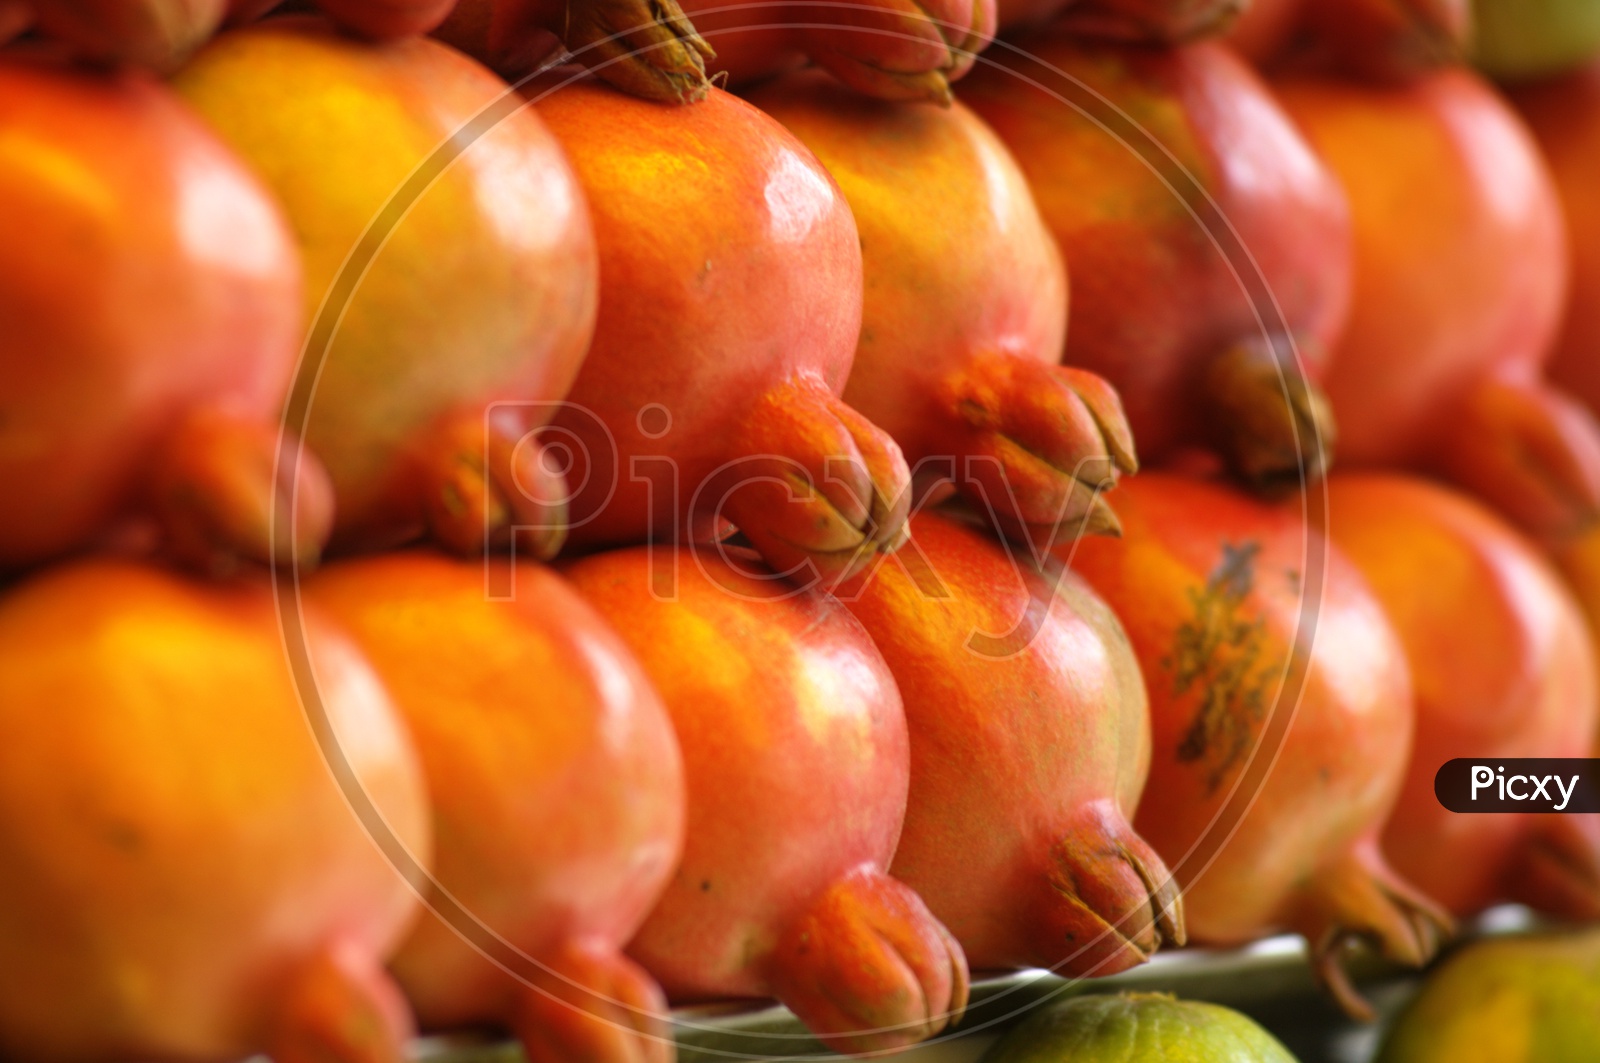 Close up shot of Pomegranate fruit placed in sequence